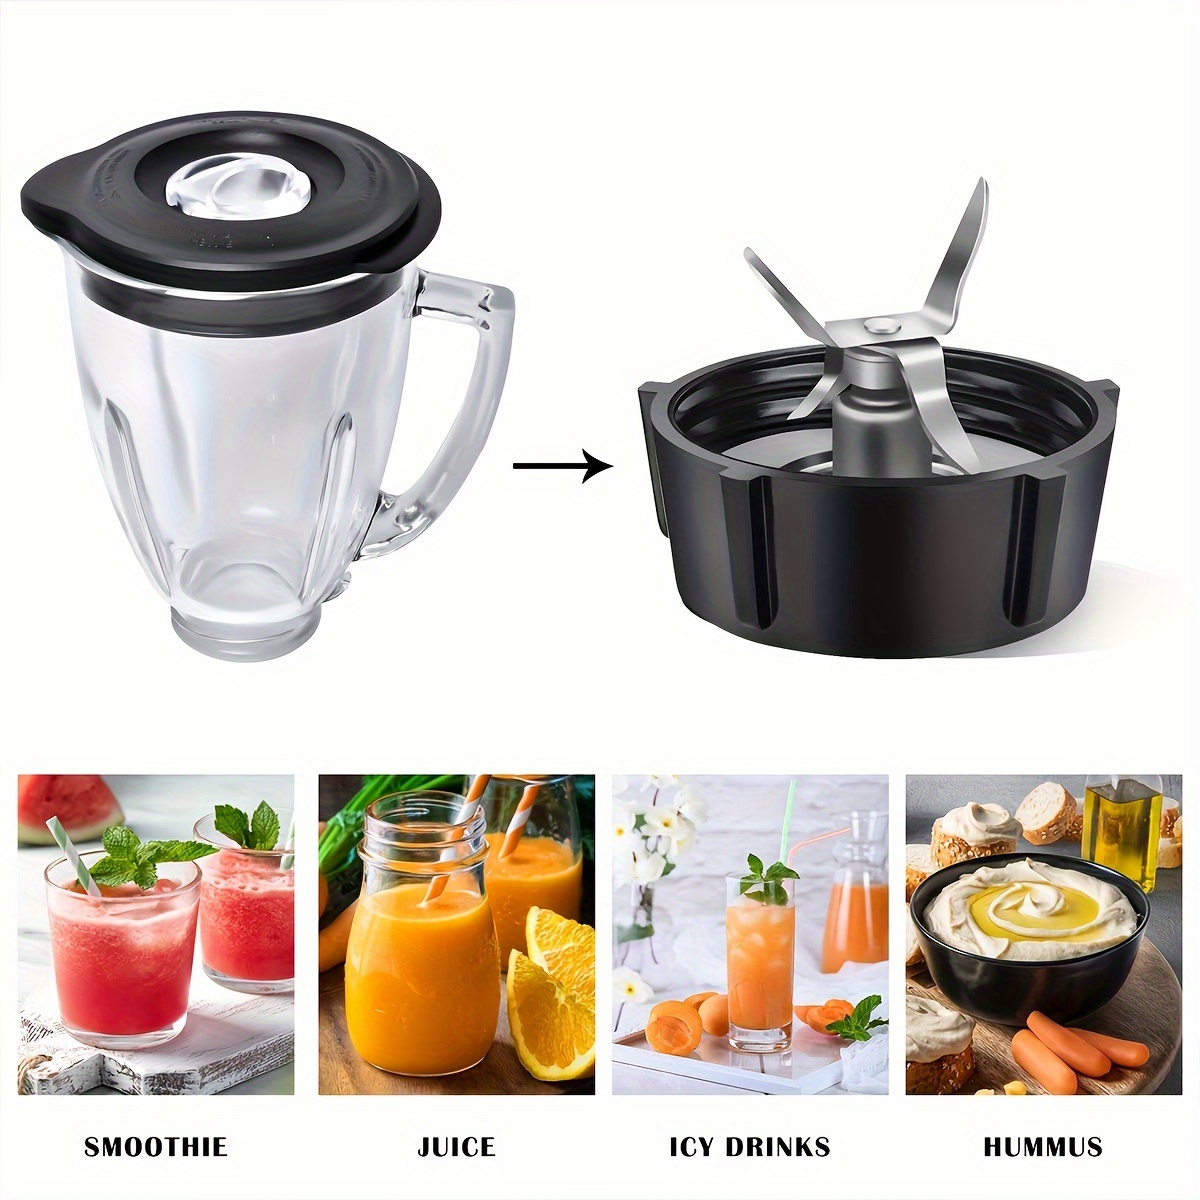 Gdrtwwh Masticating Juicer Accessories, Juicer Machines Attachments  Compatible with All KitchenAid Stand Mixers and Cuisinart